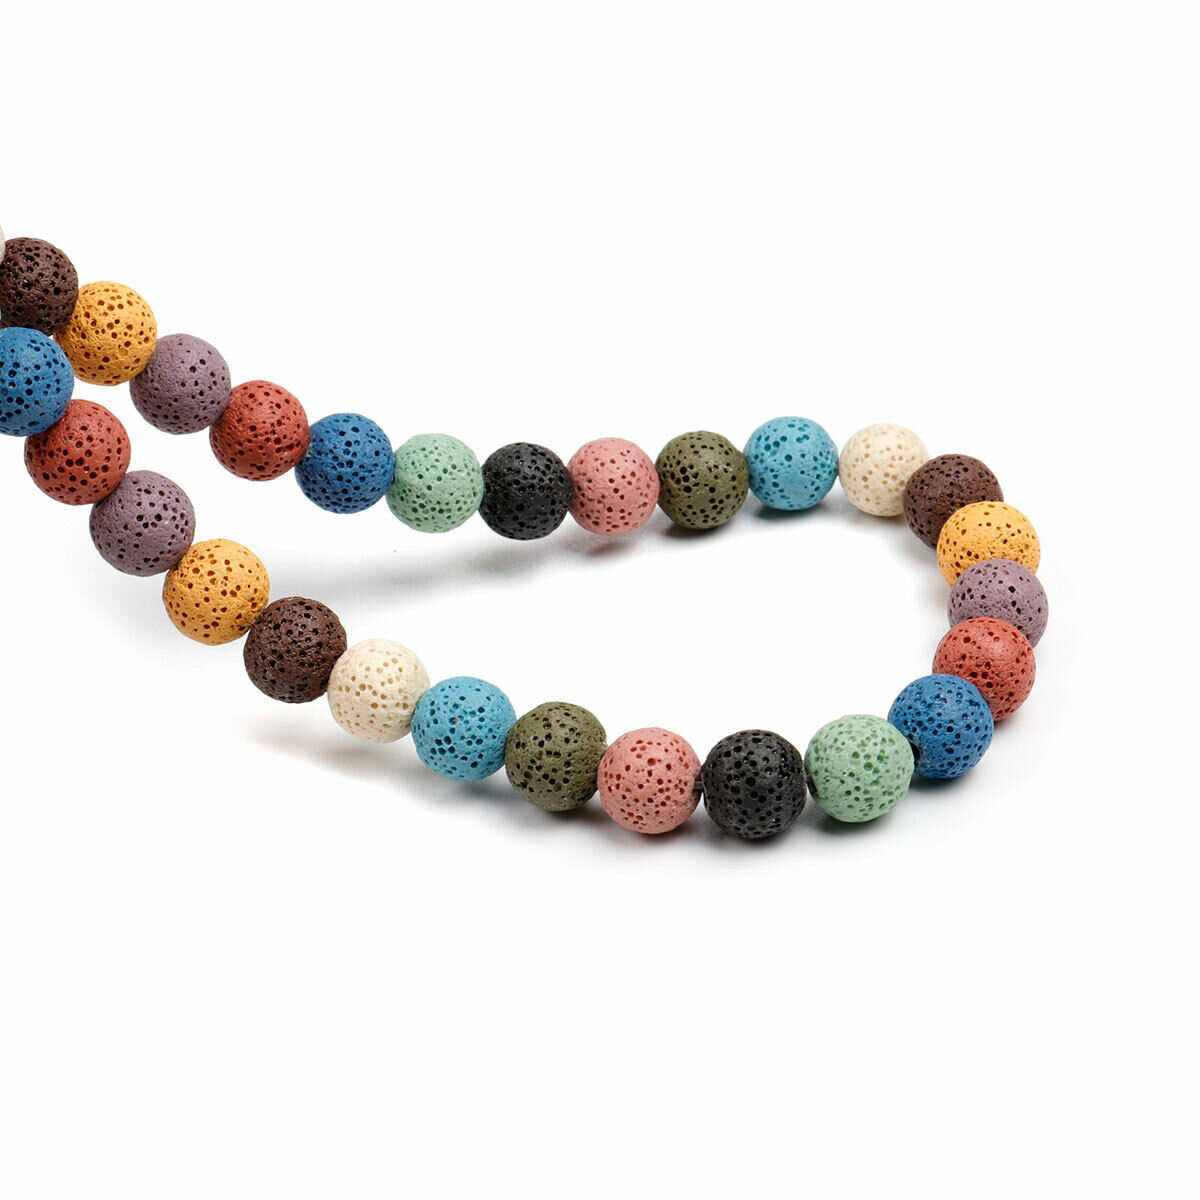 6-12mm Natural Lava Rock Round Beads Colormix -14.5" strand